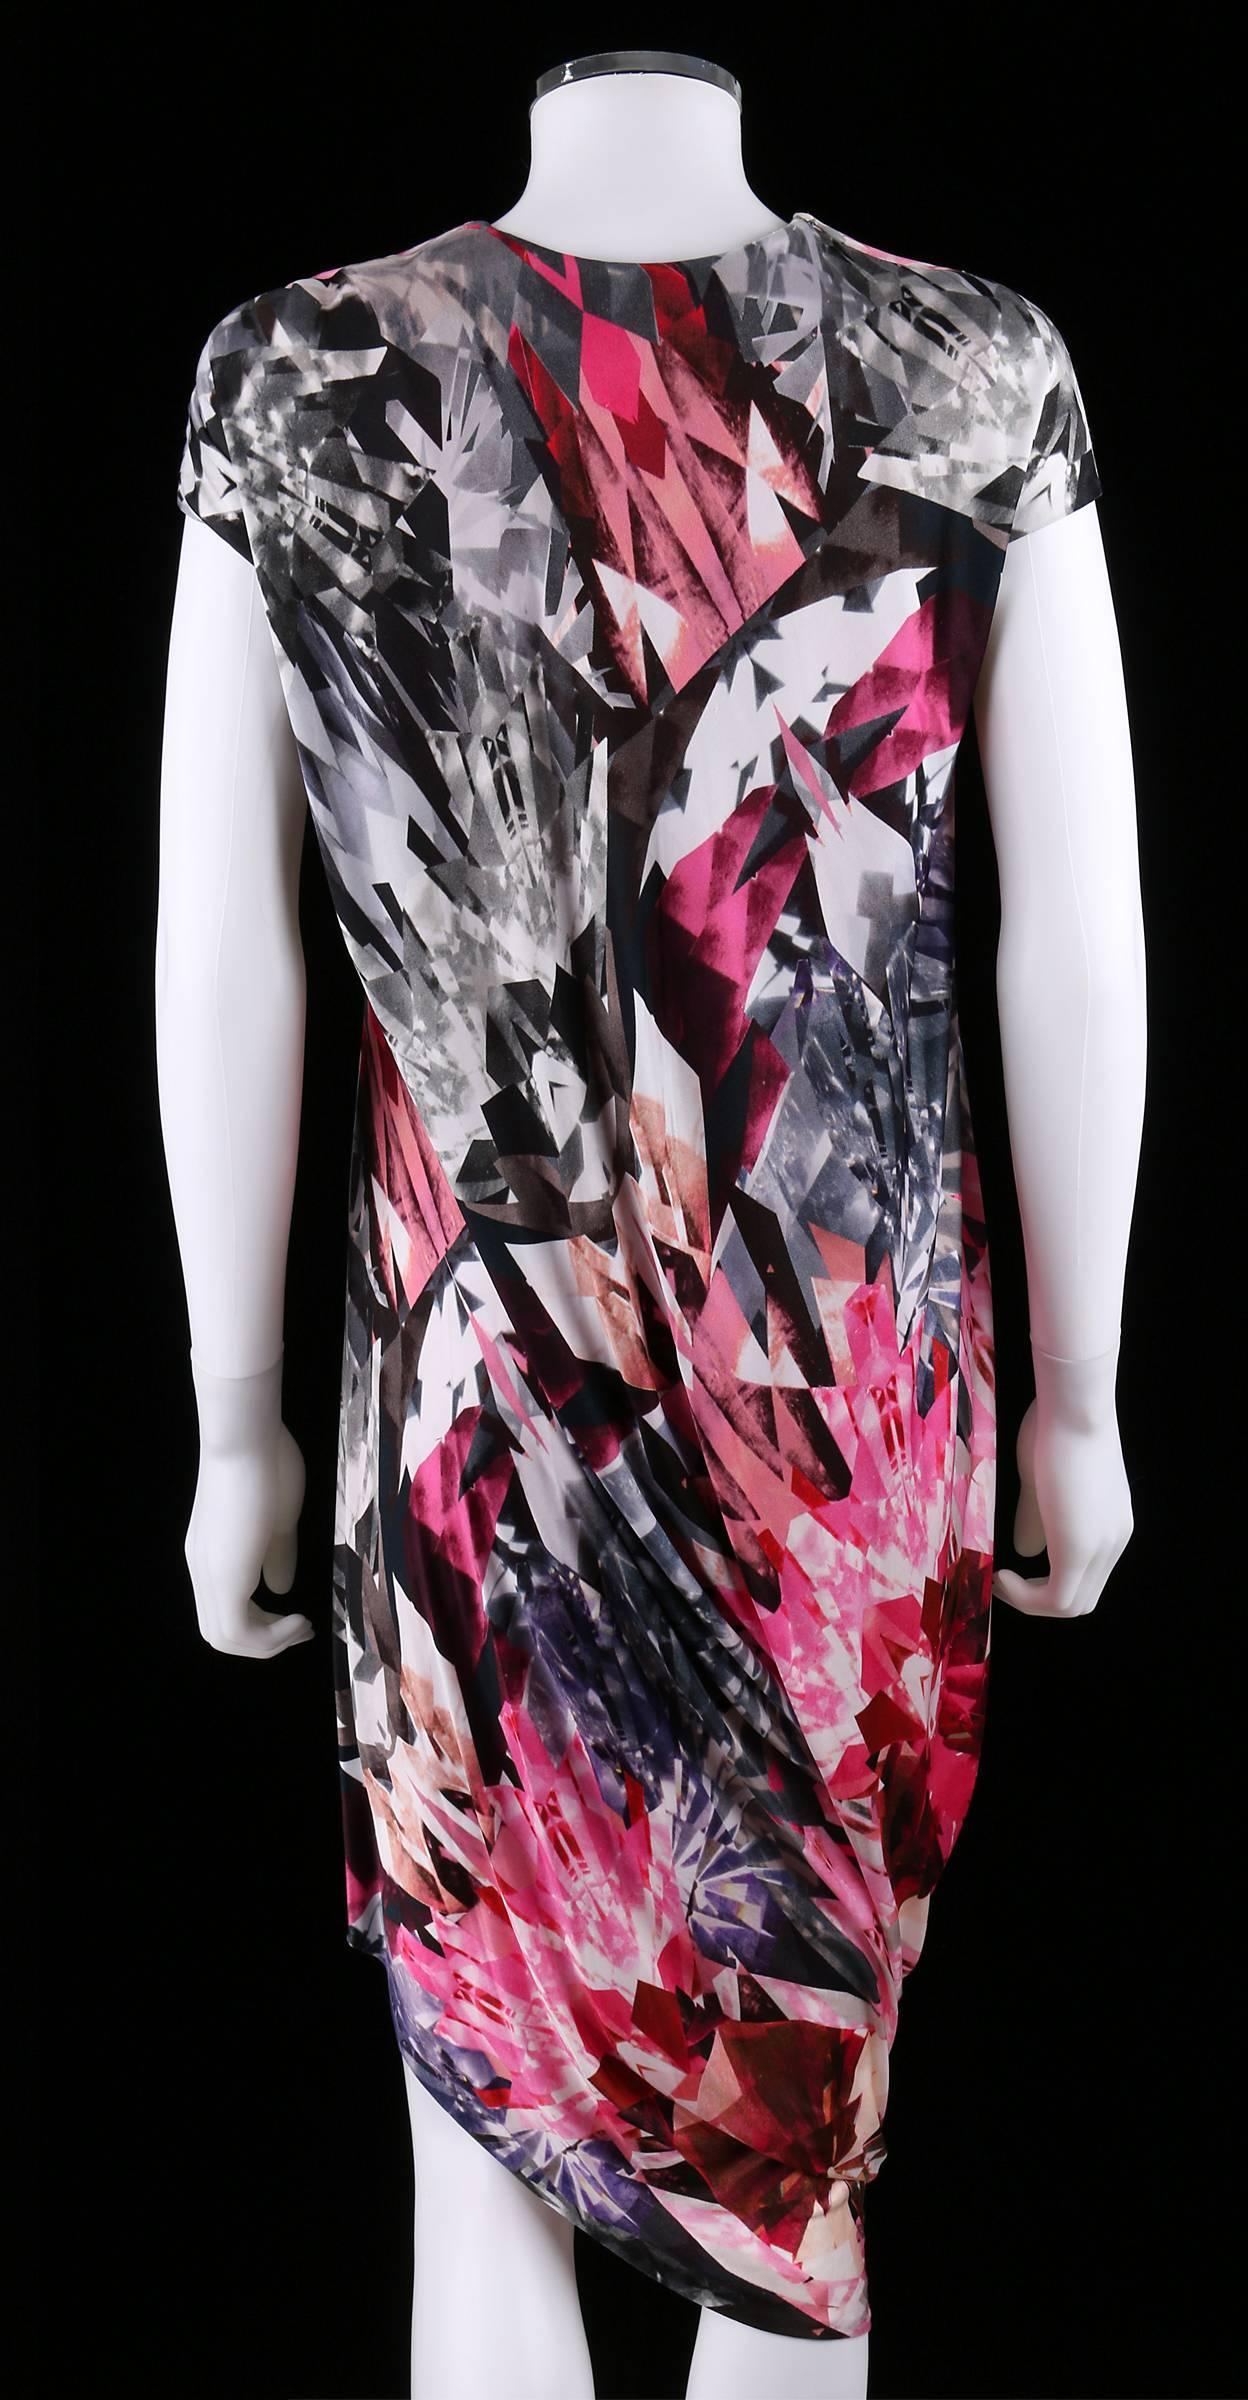 Rare and iconic kaleidoscope print dress in shades of pink, gray, and white.  From Alexander McQueen's Spring-Summer 2009 